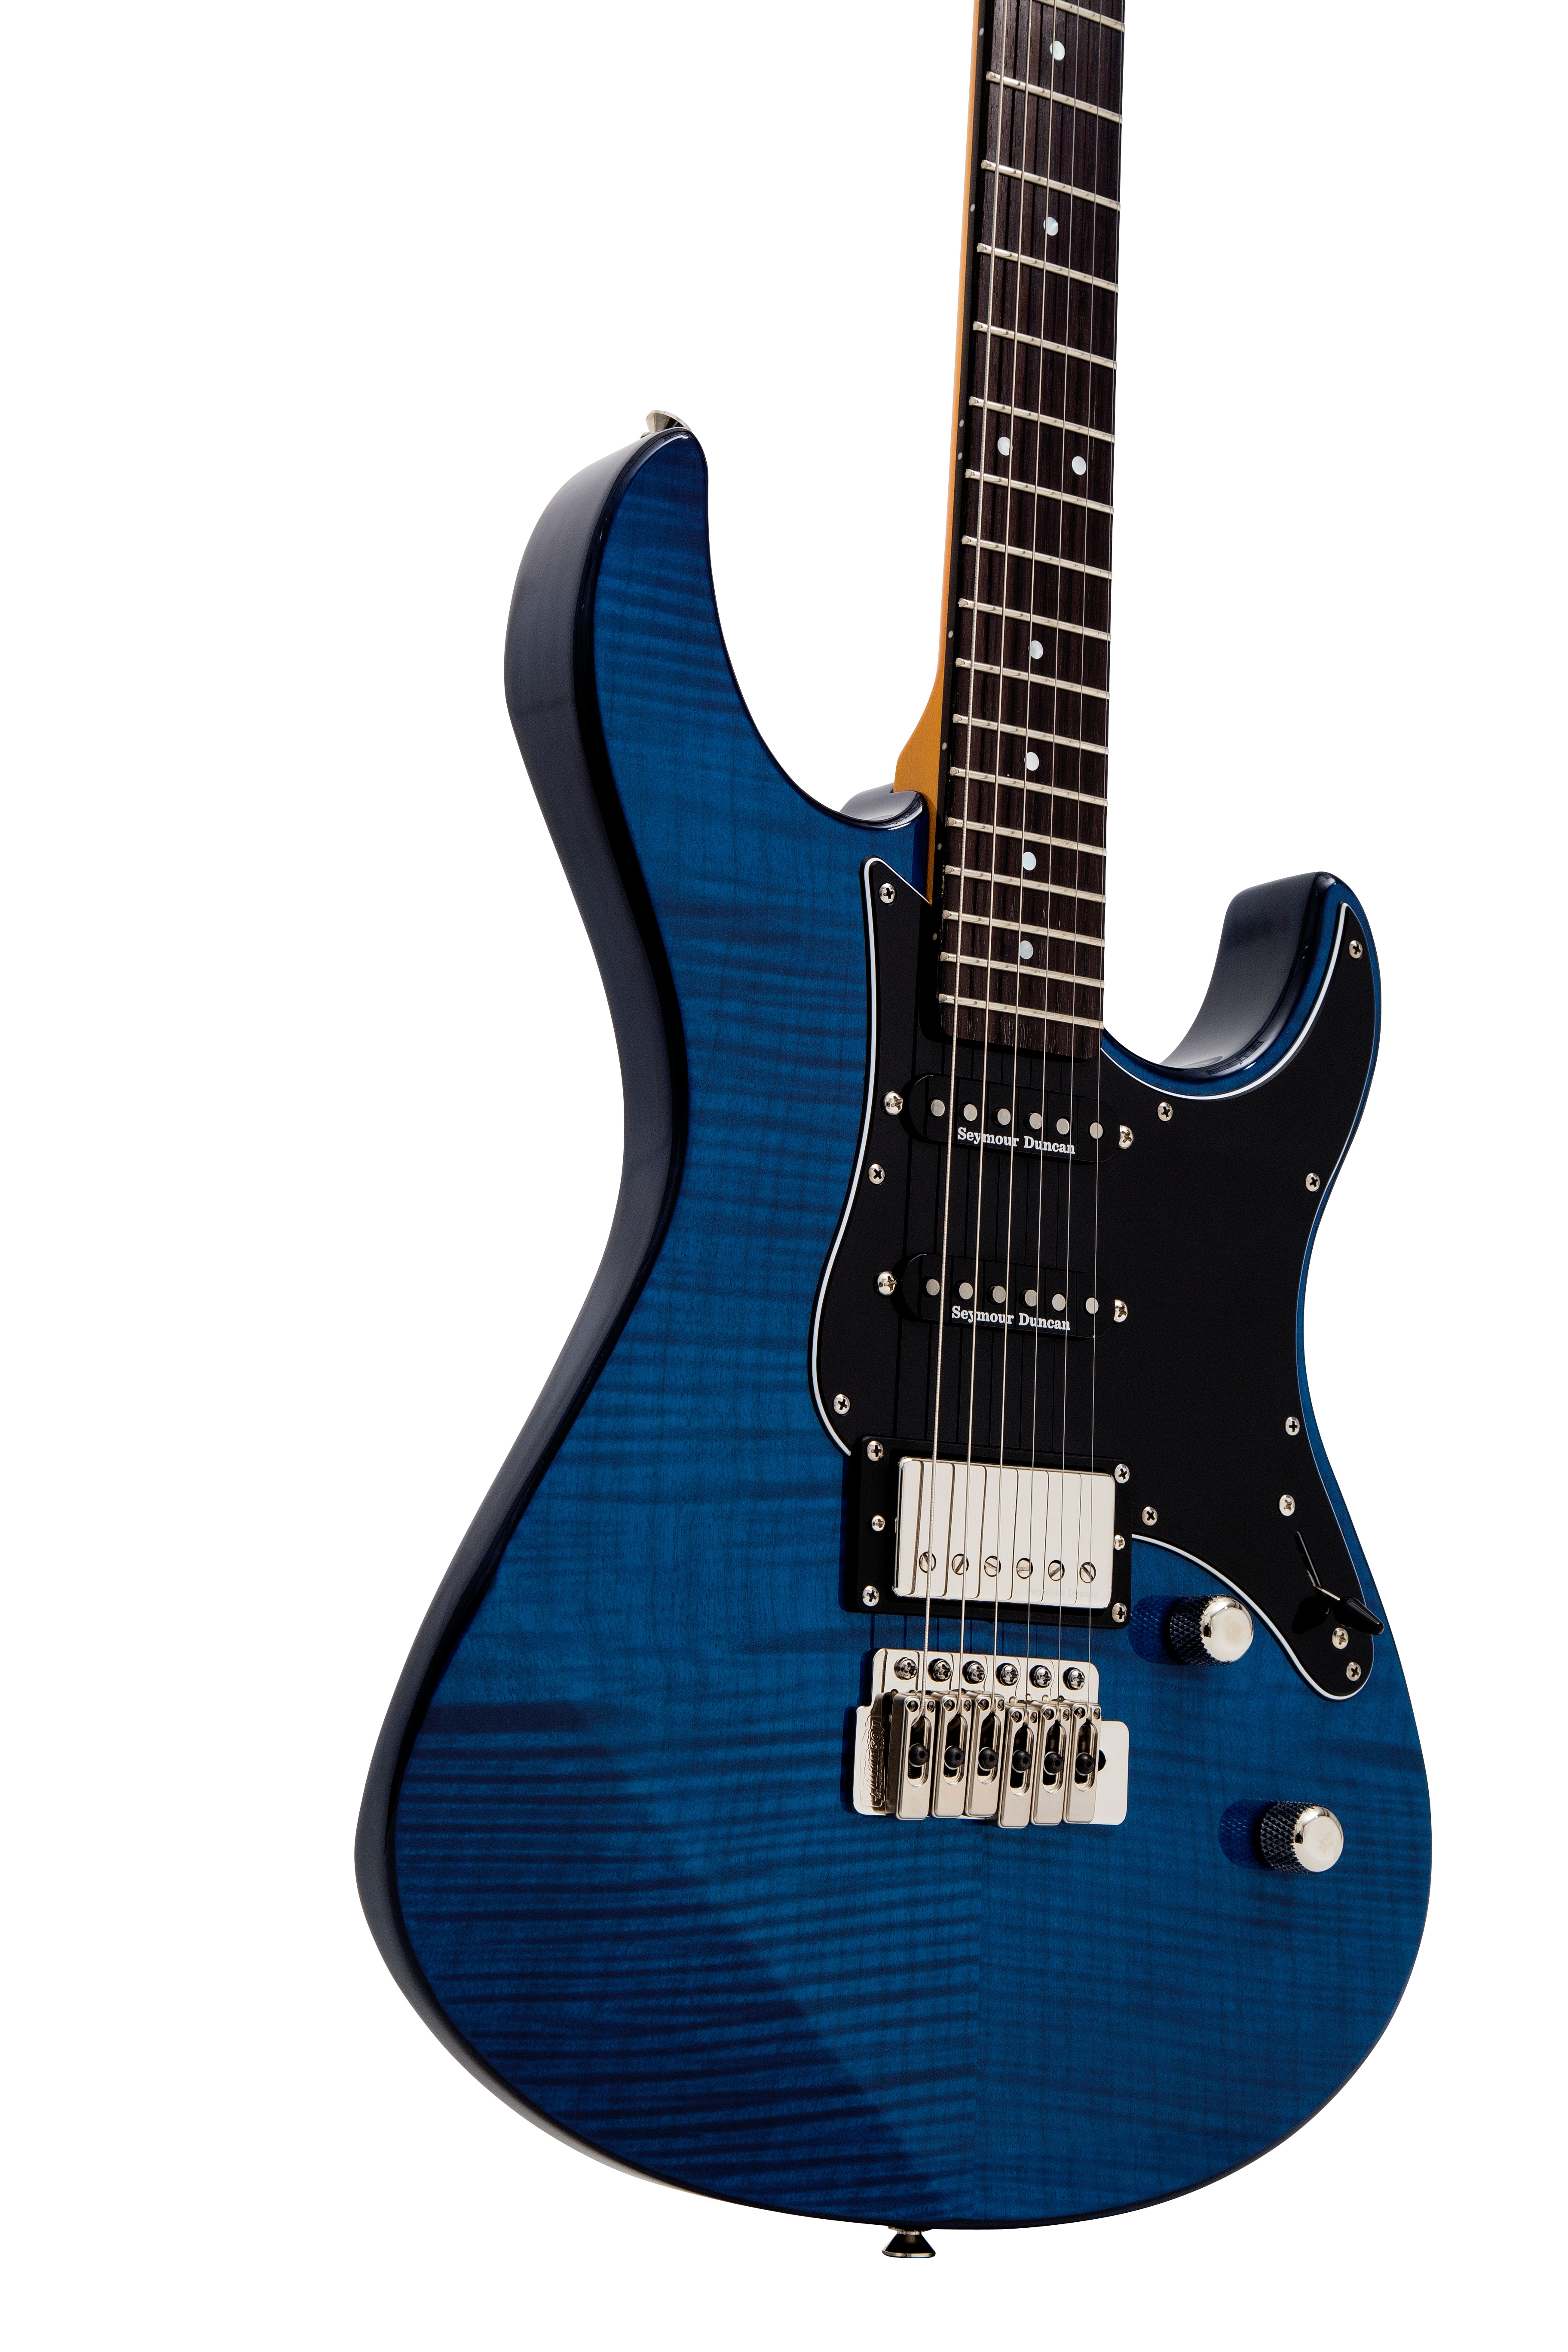 Yamaha Unveils Limited Edition Pacifica 612VII Electric Guitar